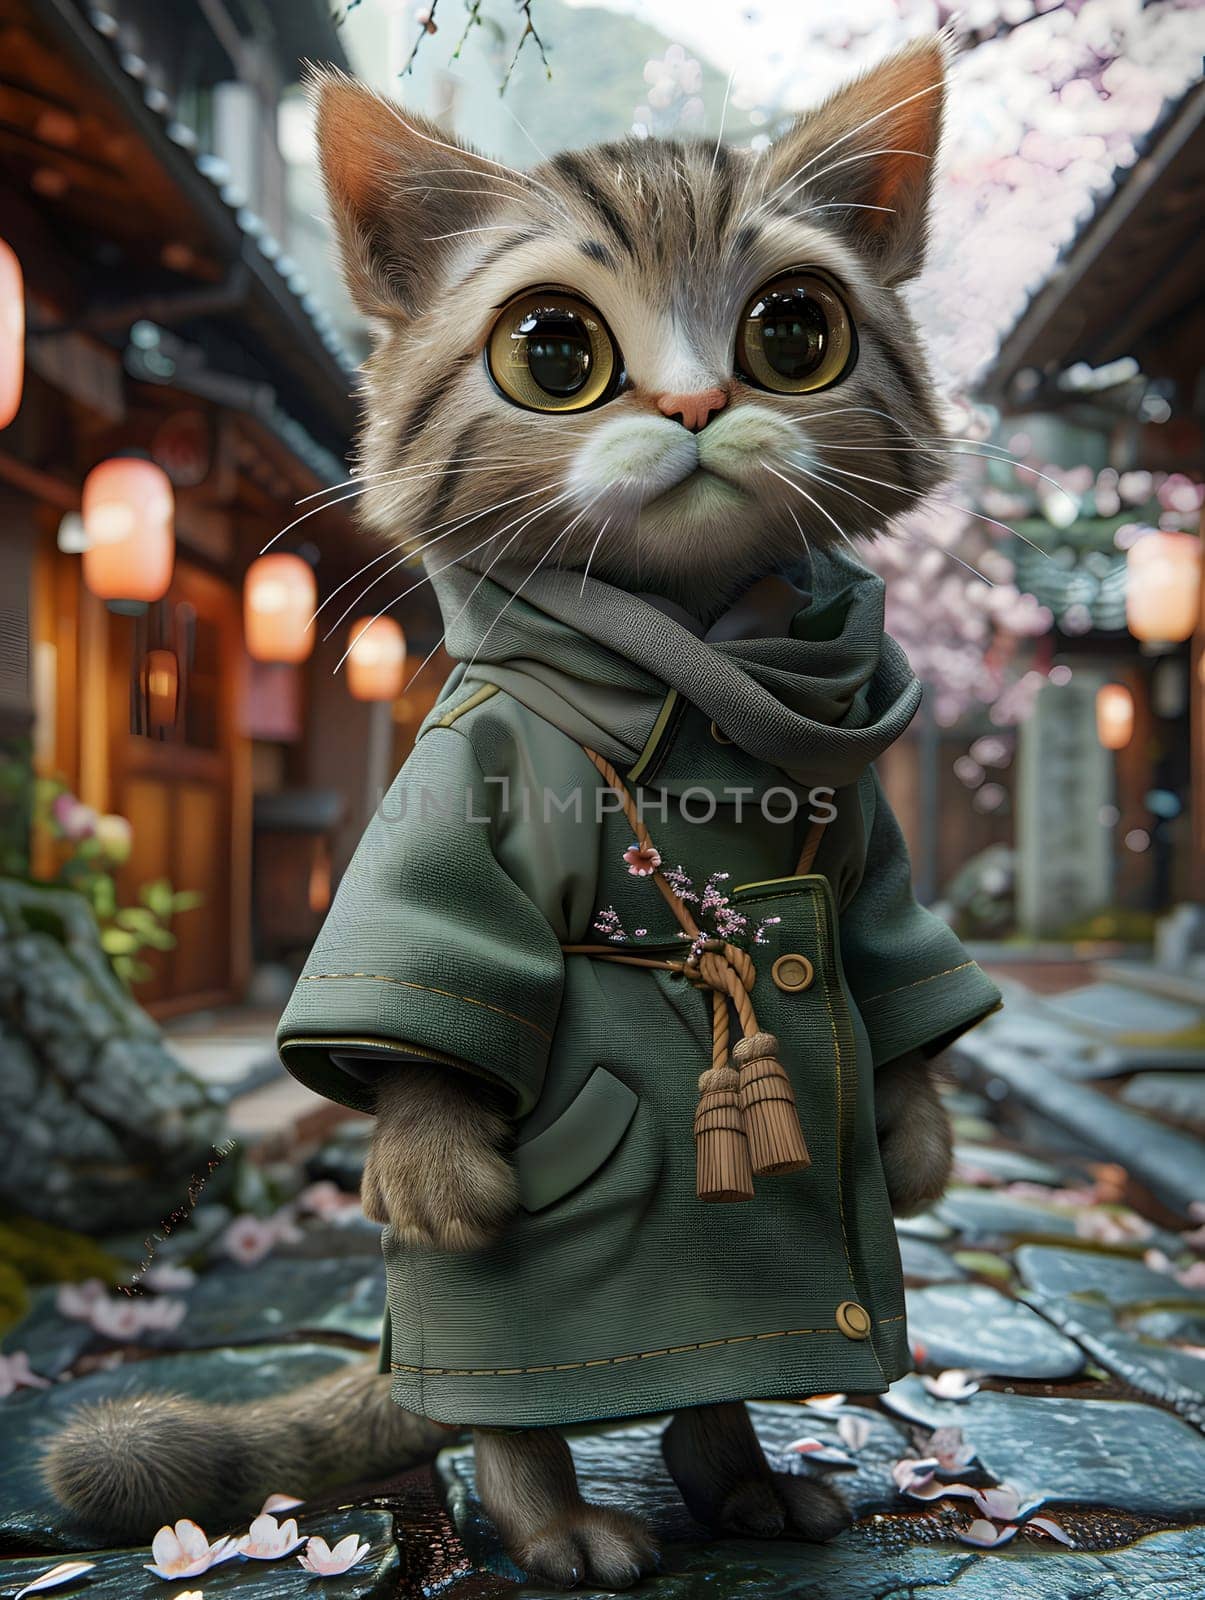 A Felidae Carnivore with whiskers and fur, resembling a small to mediumsized cat, is standing on a cobblestone street wearing a green coat and scarf